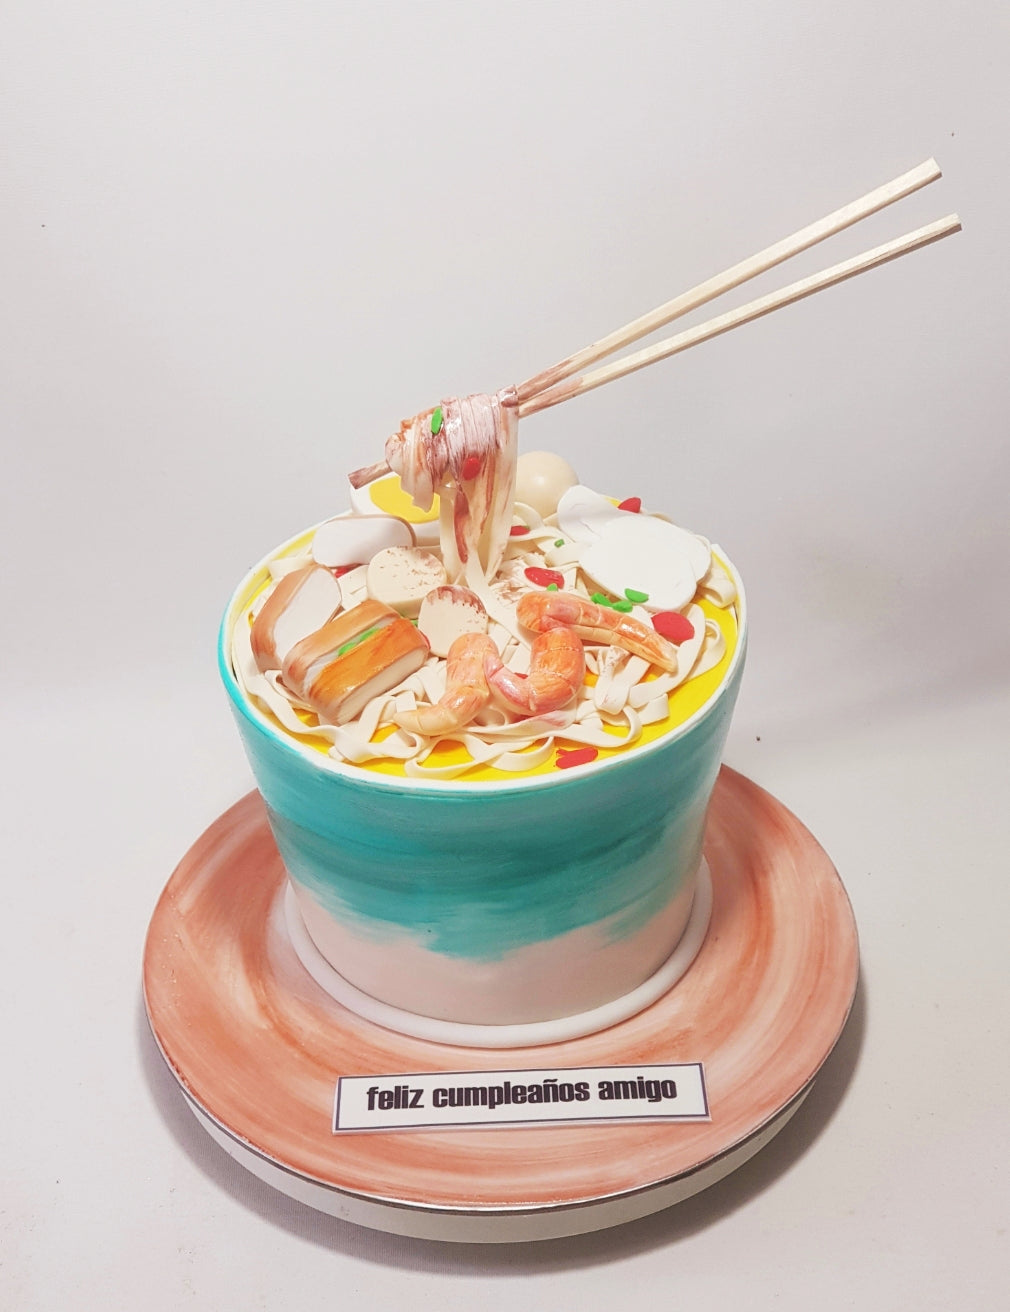 Non-fondant red velvet ramen cake with edible side side dishes including  the little bowl for the husband's birthday! : r/cakedecorating